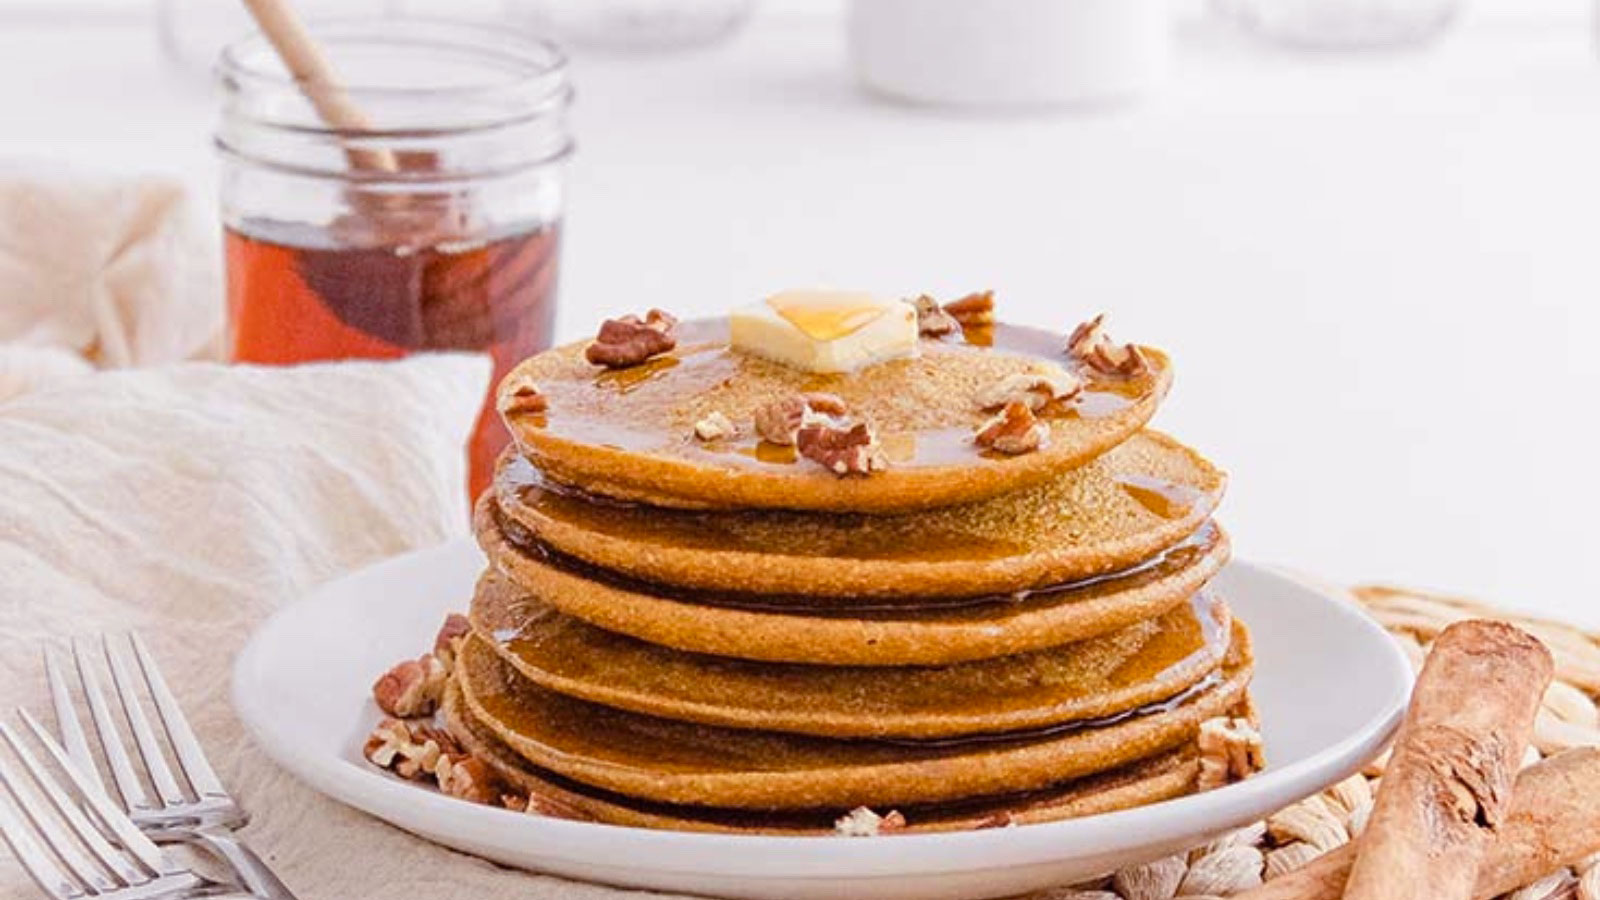 A stack of Pumpkin Oatmeal Pancakes on a white plate, topped with butter, syrup and pecans.